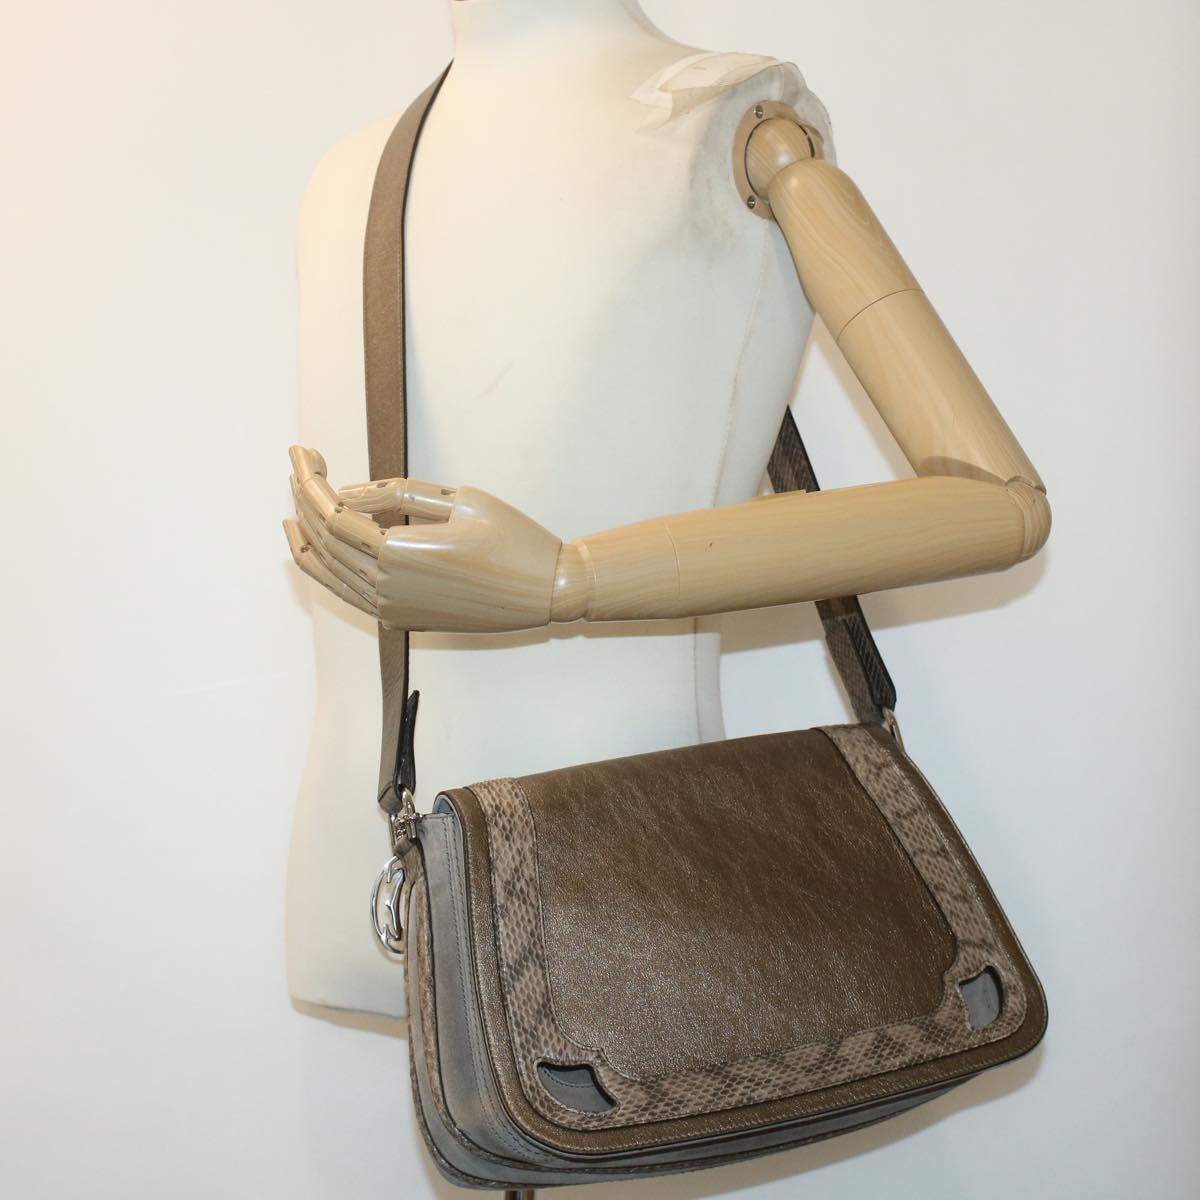 Chloe Shoulder Bag Suede Leather Gray Auth 44064